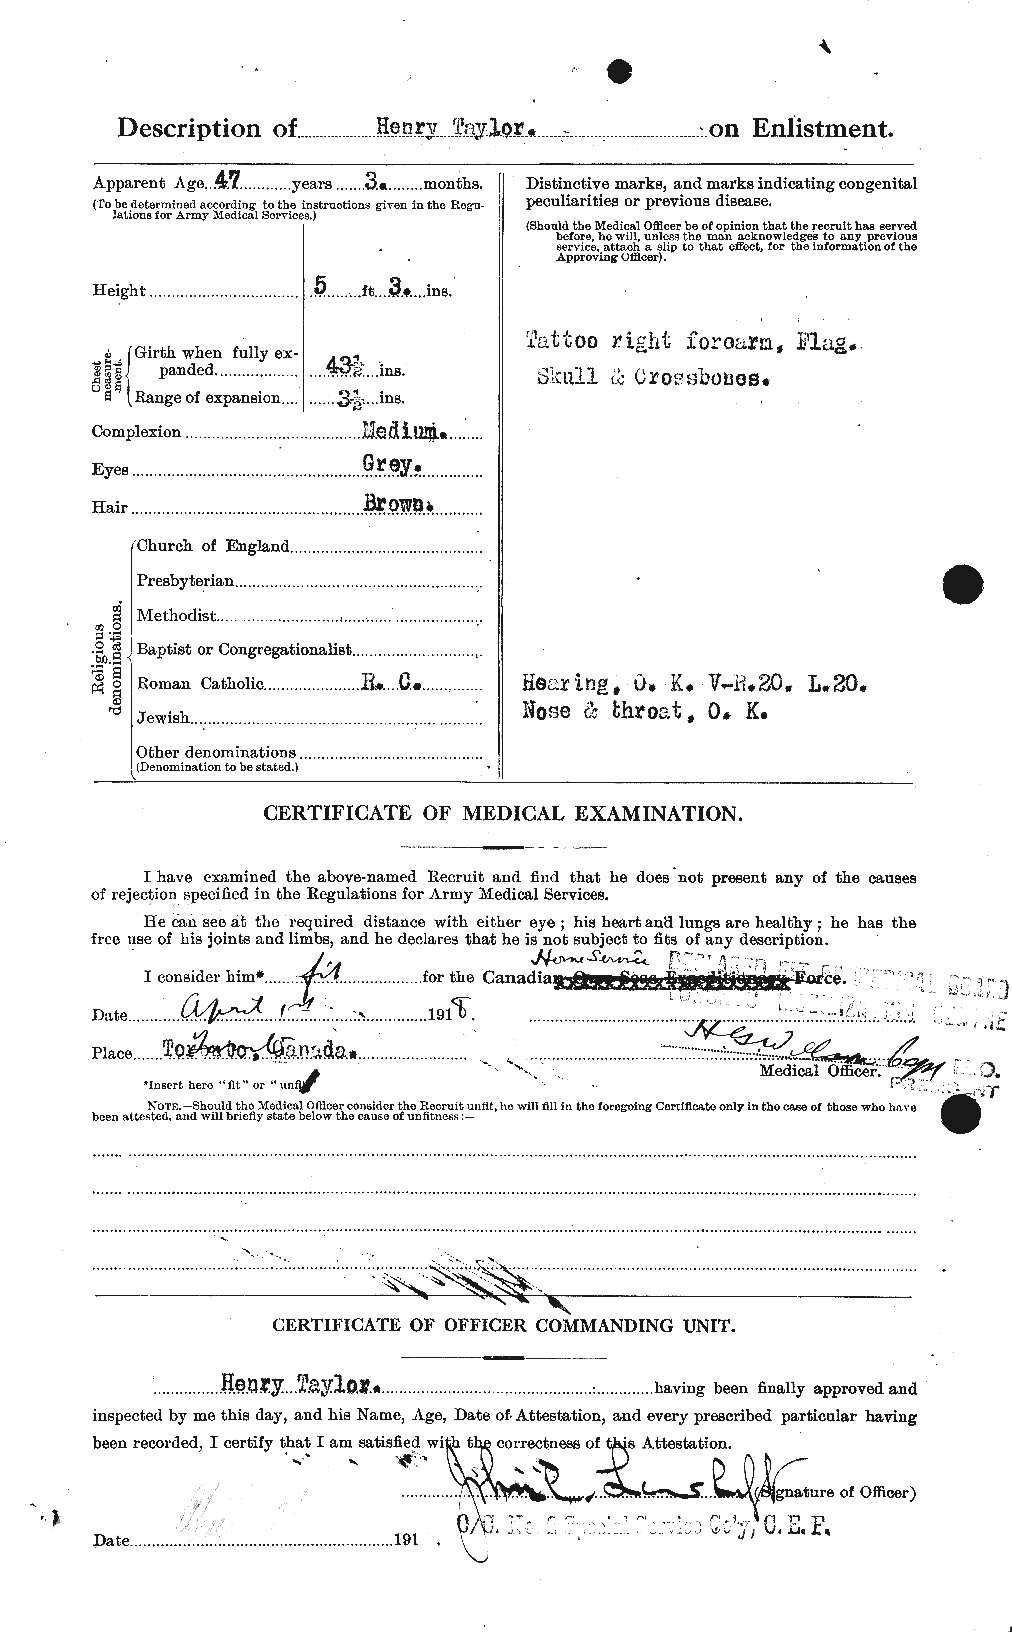 Personnel Records of the First World War - CEF 626525b